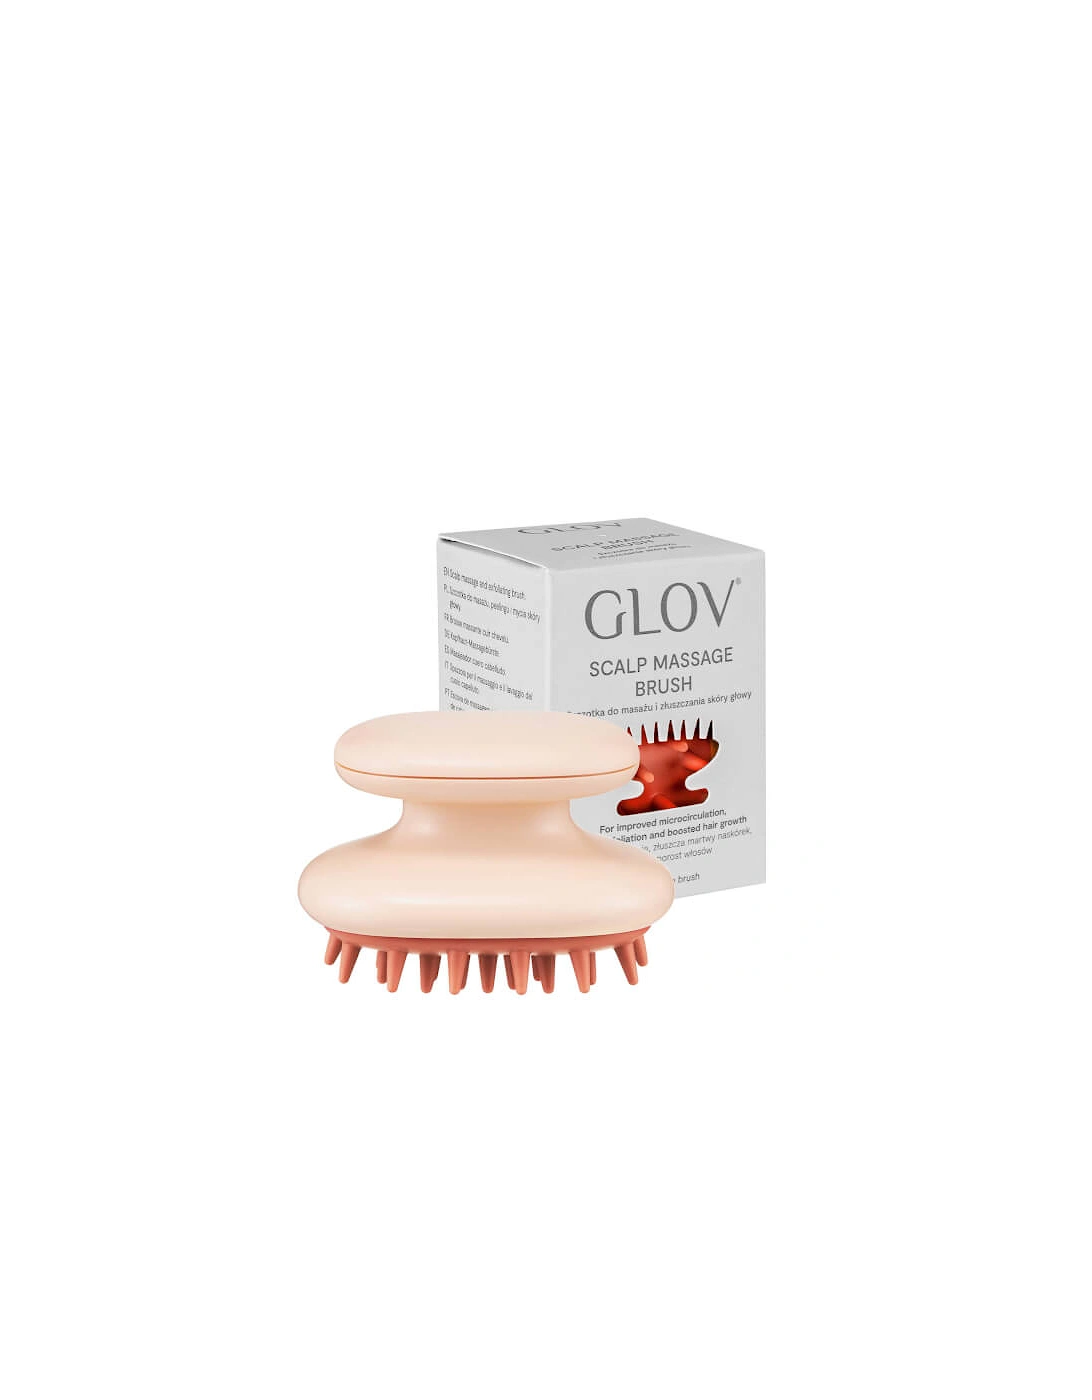 GLOV® Scalp Massage Brush for Improved Microcirculation, Exfoliation and Hair Growth, 2 of 1